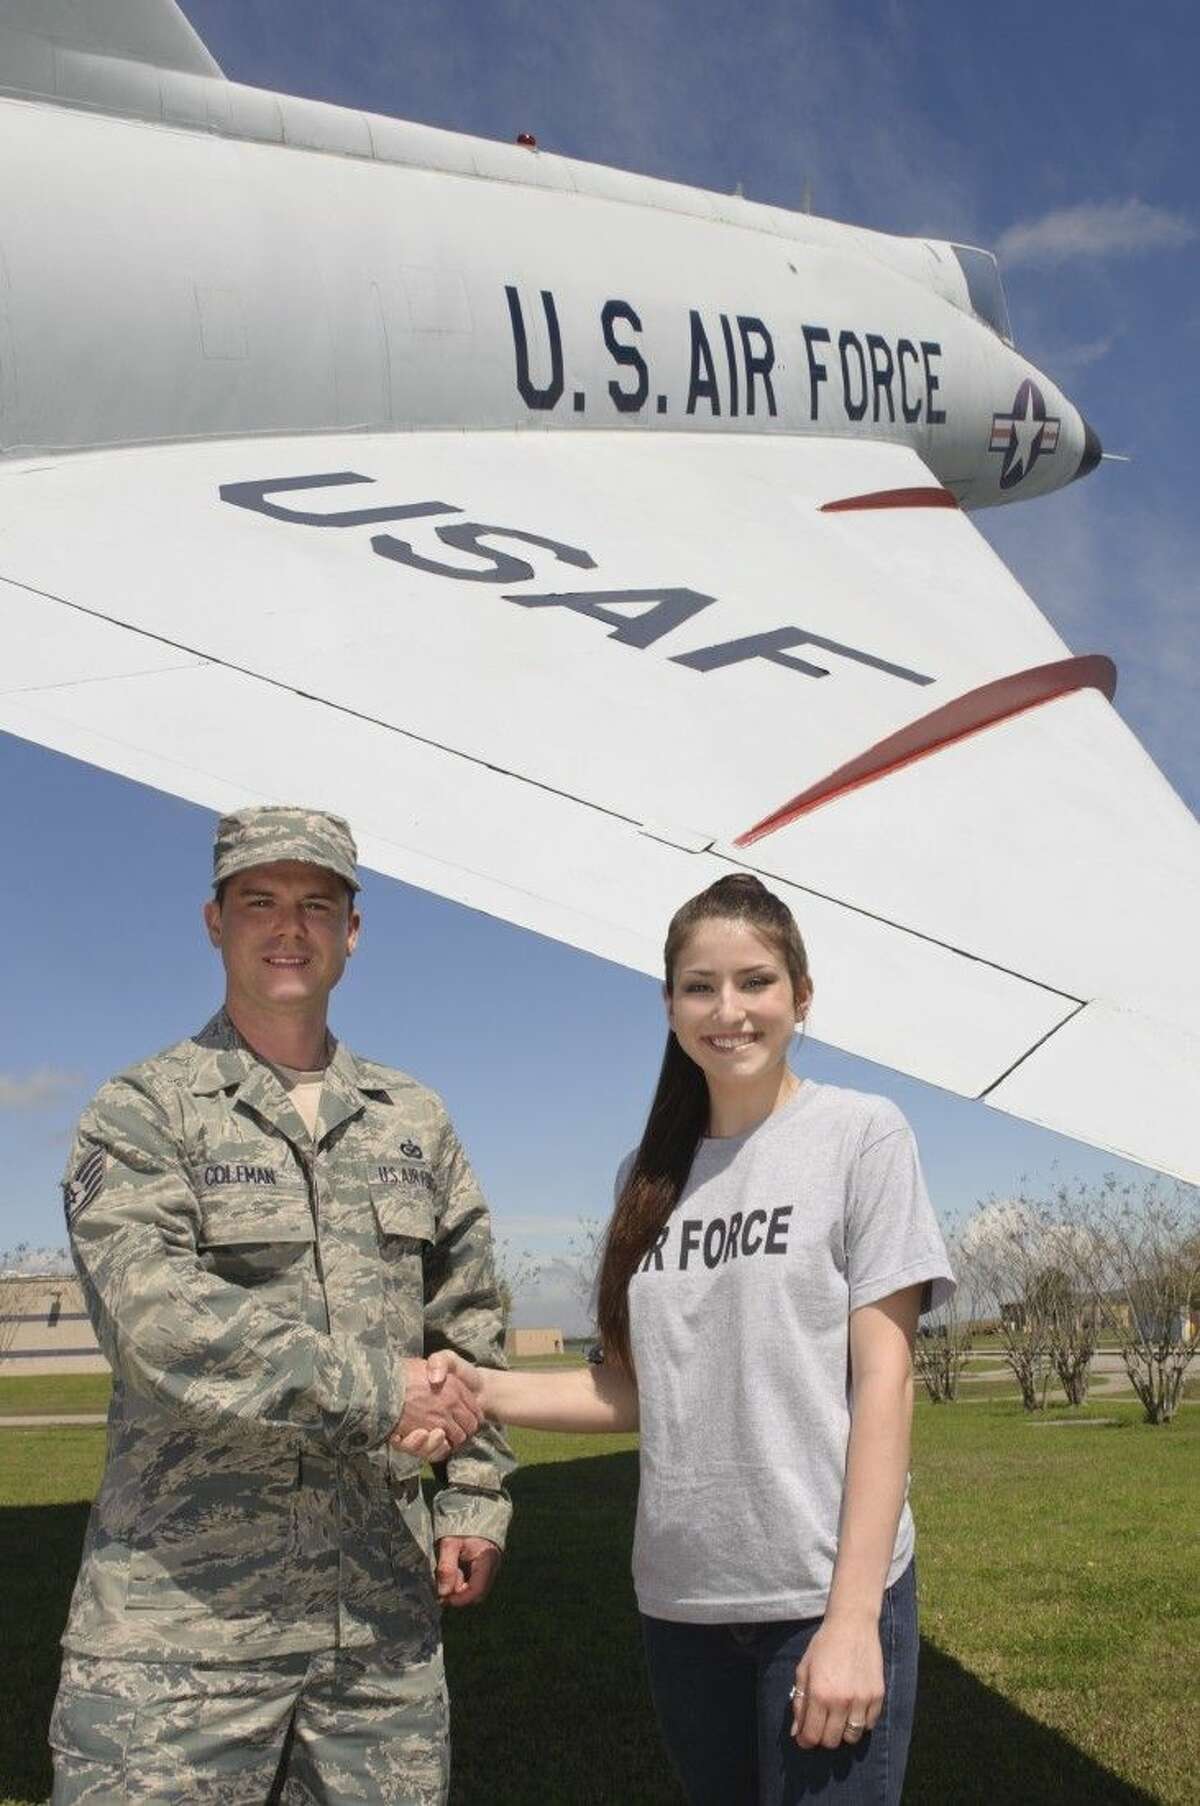 Clear Lake High School graduate Anna Leigh Baker, with TSgt William P. Coleman, enlists in the U.S. Air Force with 24 college credits and will pursue a career in medicine.